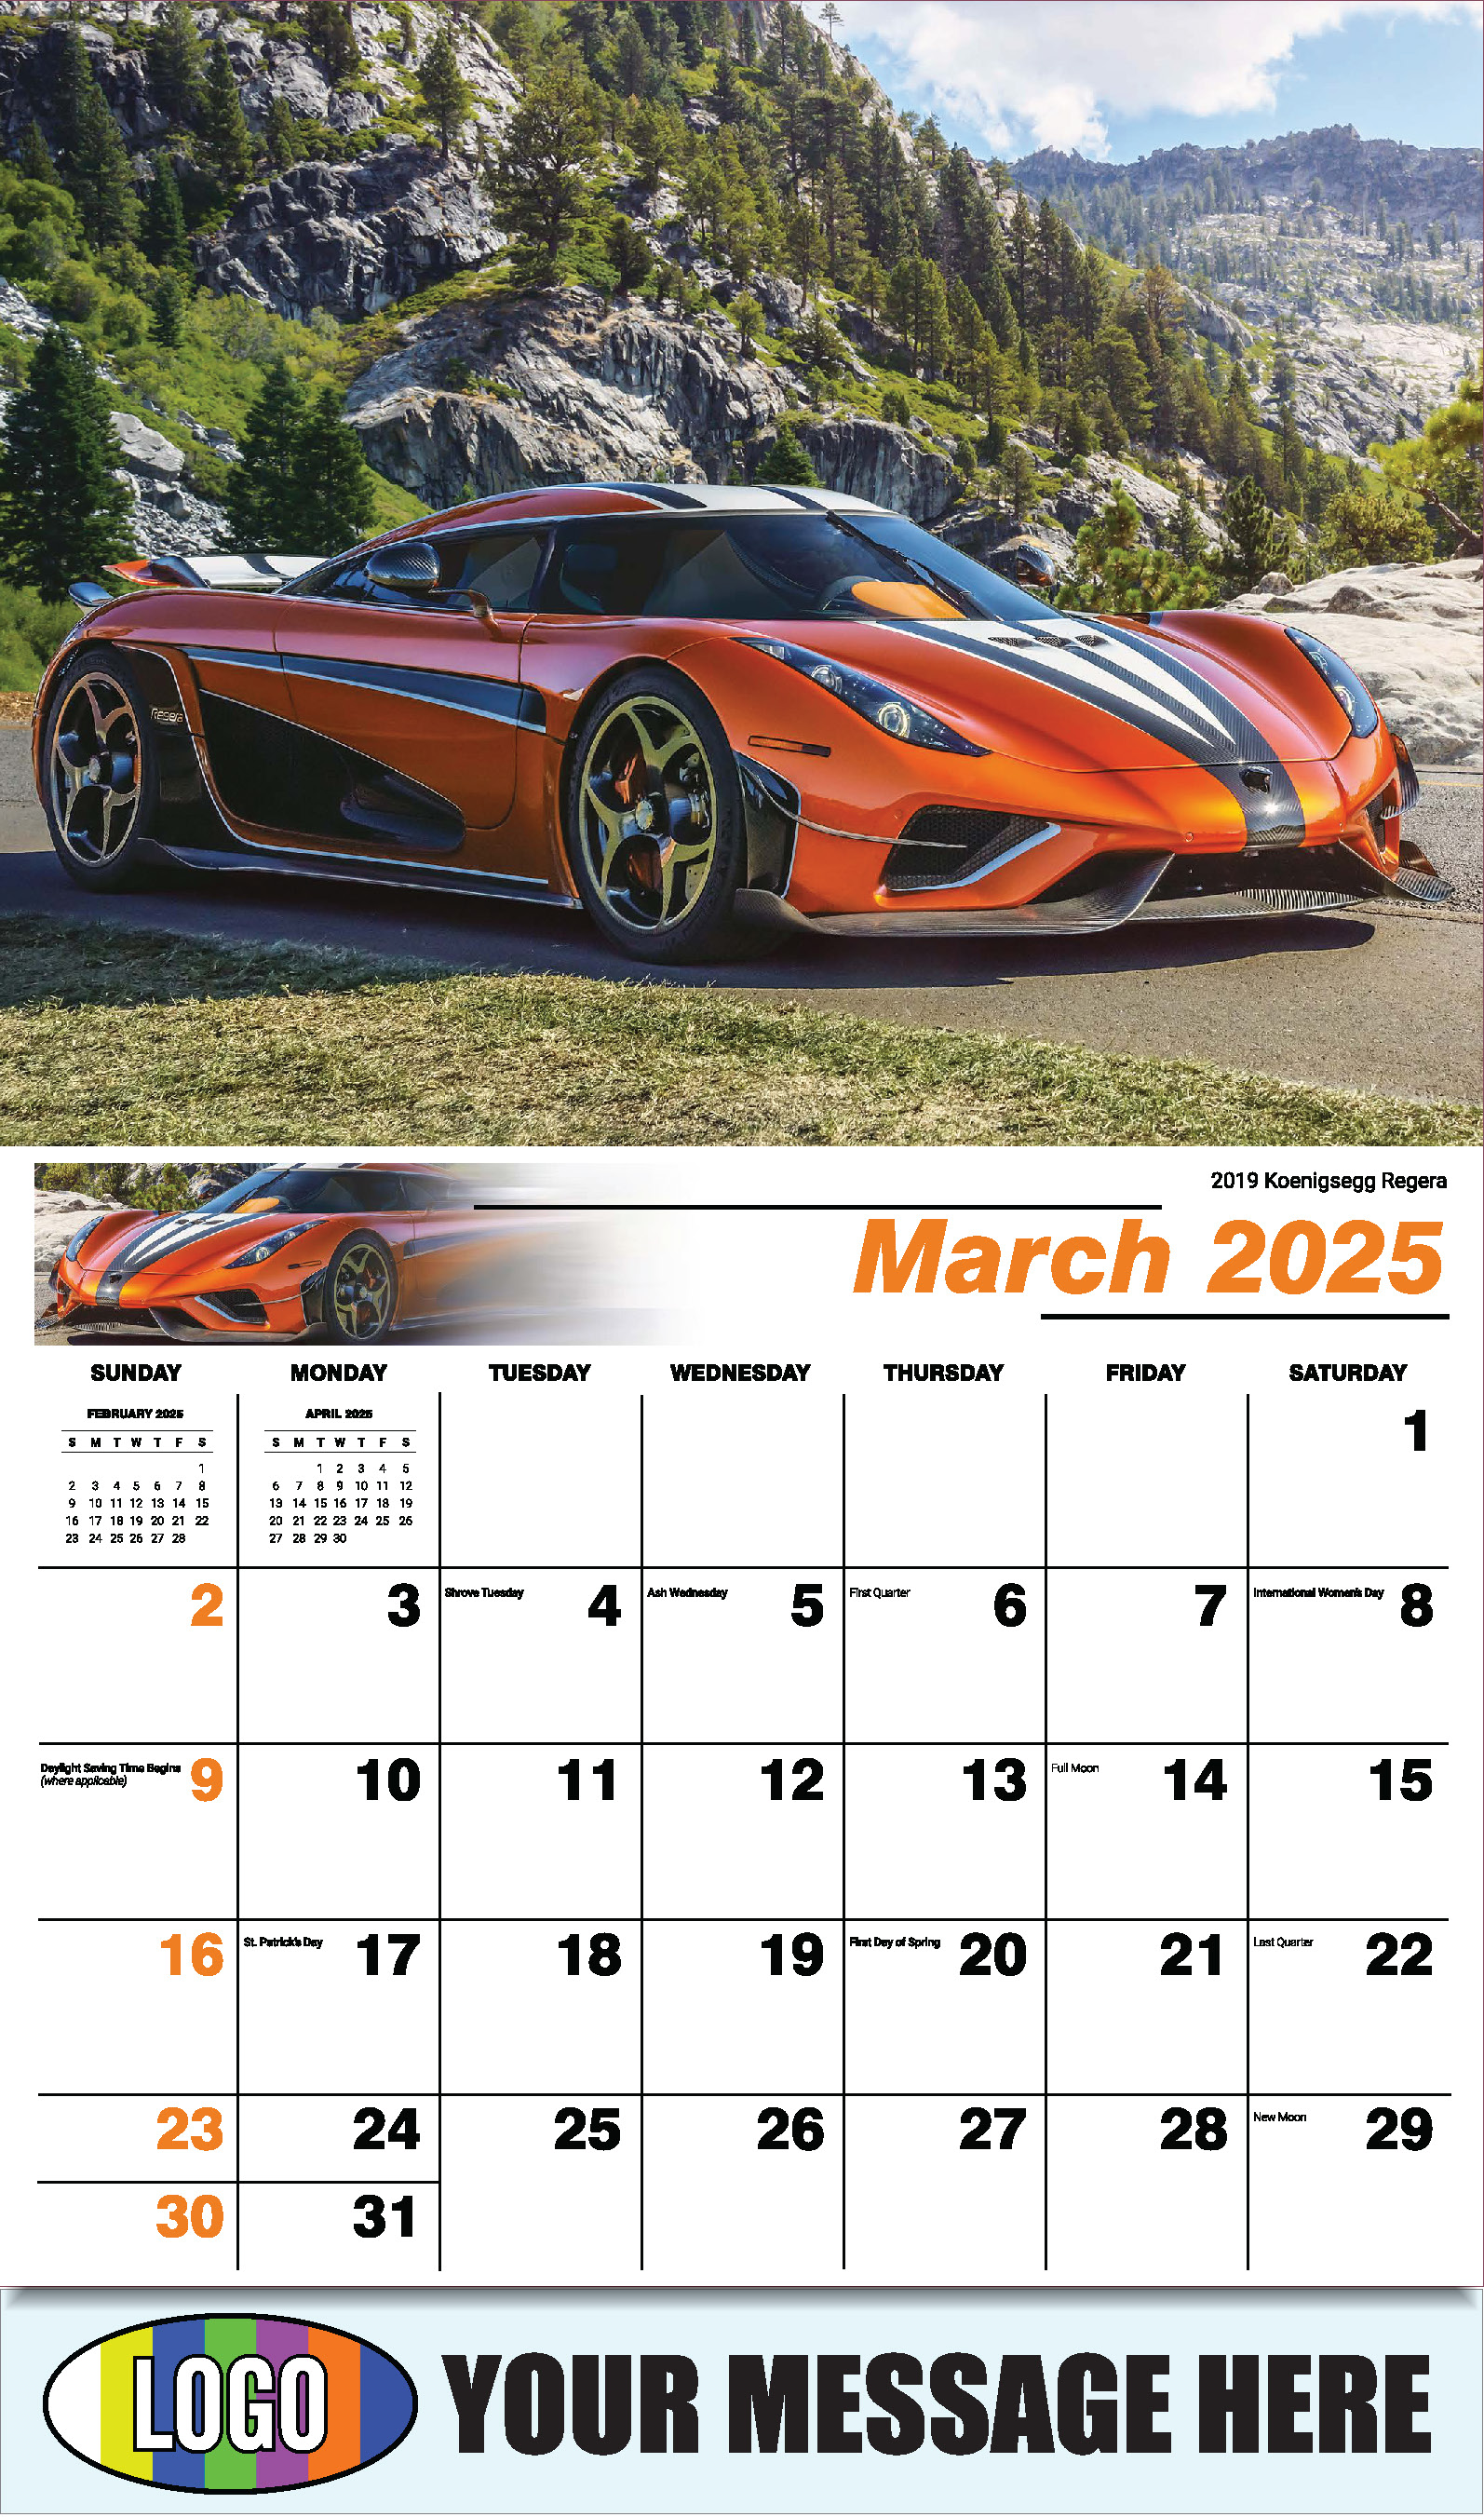 Exotic Cars 2025 Automotive Business Advertising Calendar - March